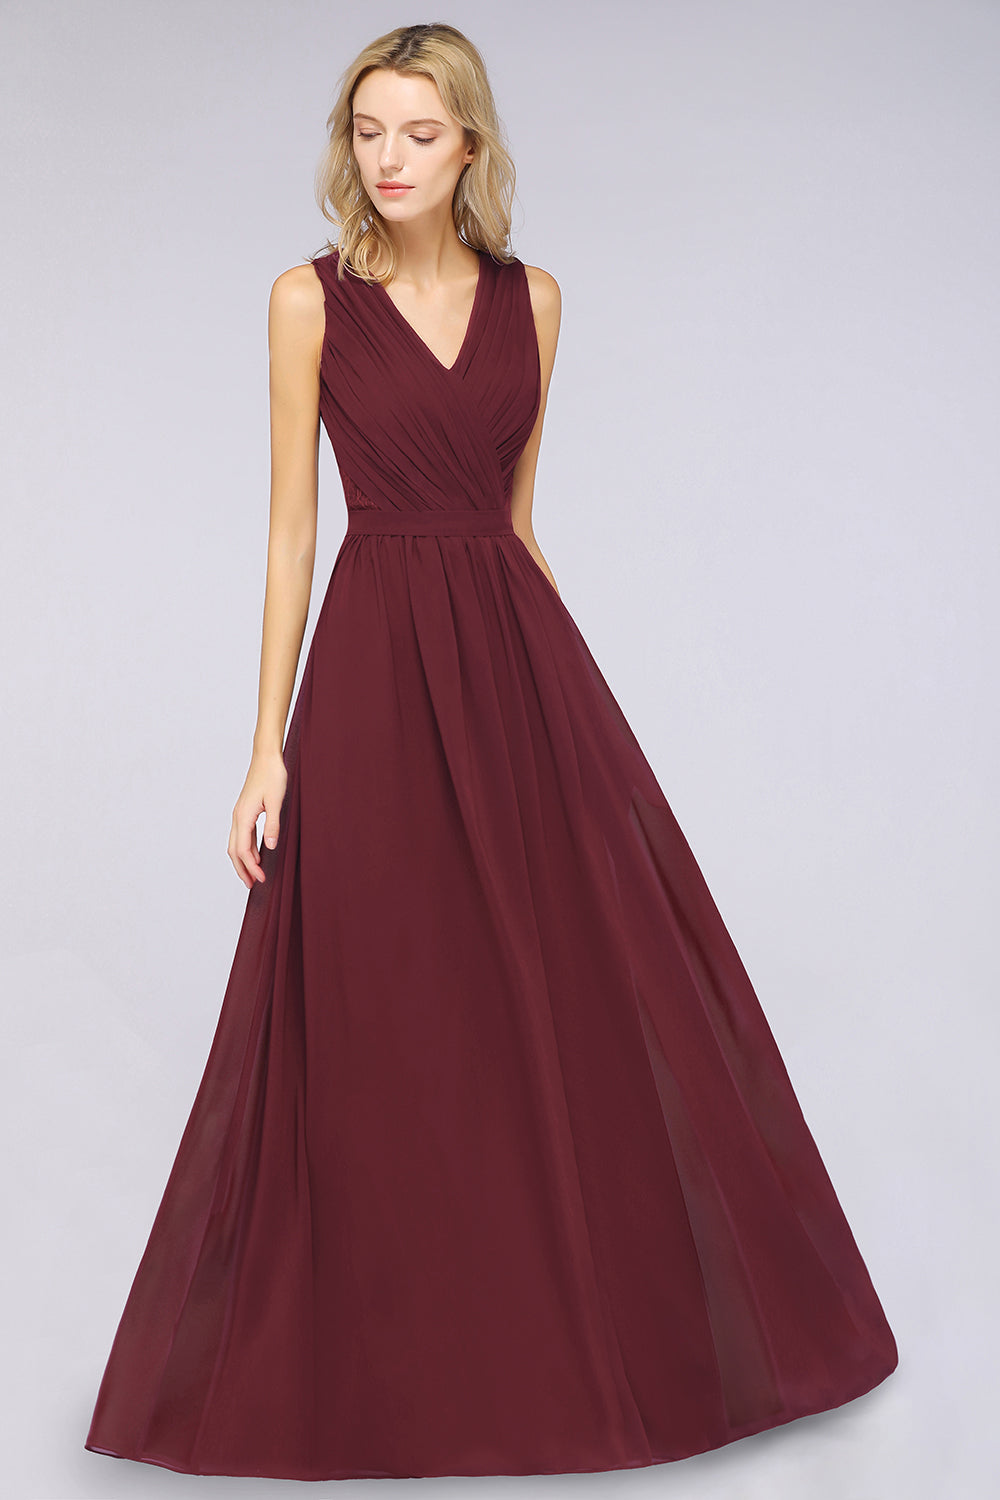 Affordable Burgundy V-Neck Ruffle Bridesmaid Dresses with Lace-Back-27dress